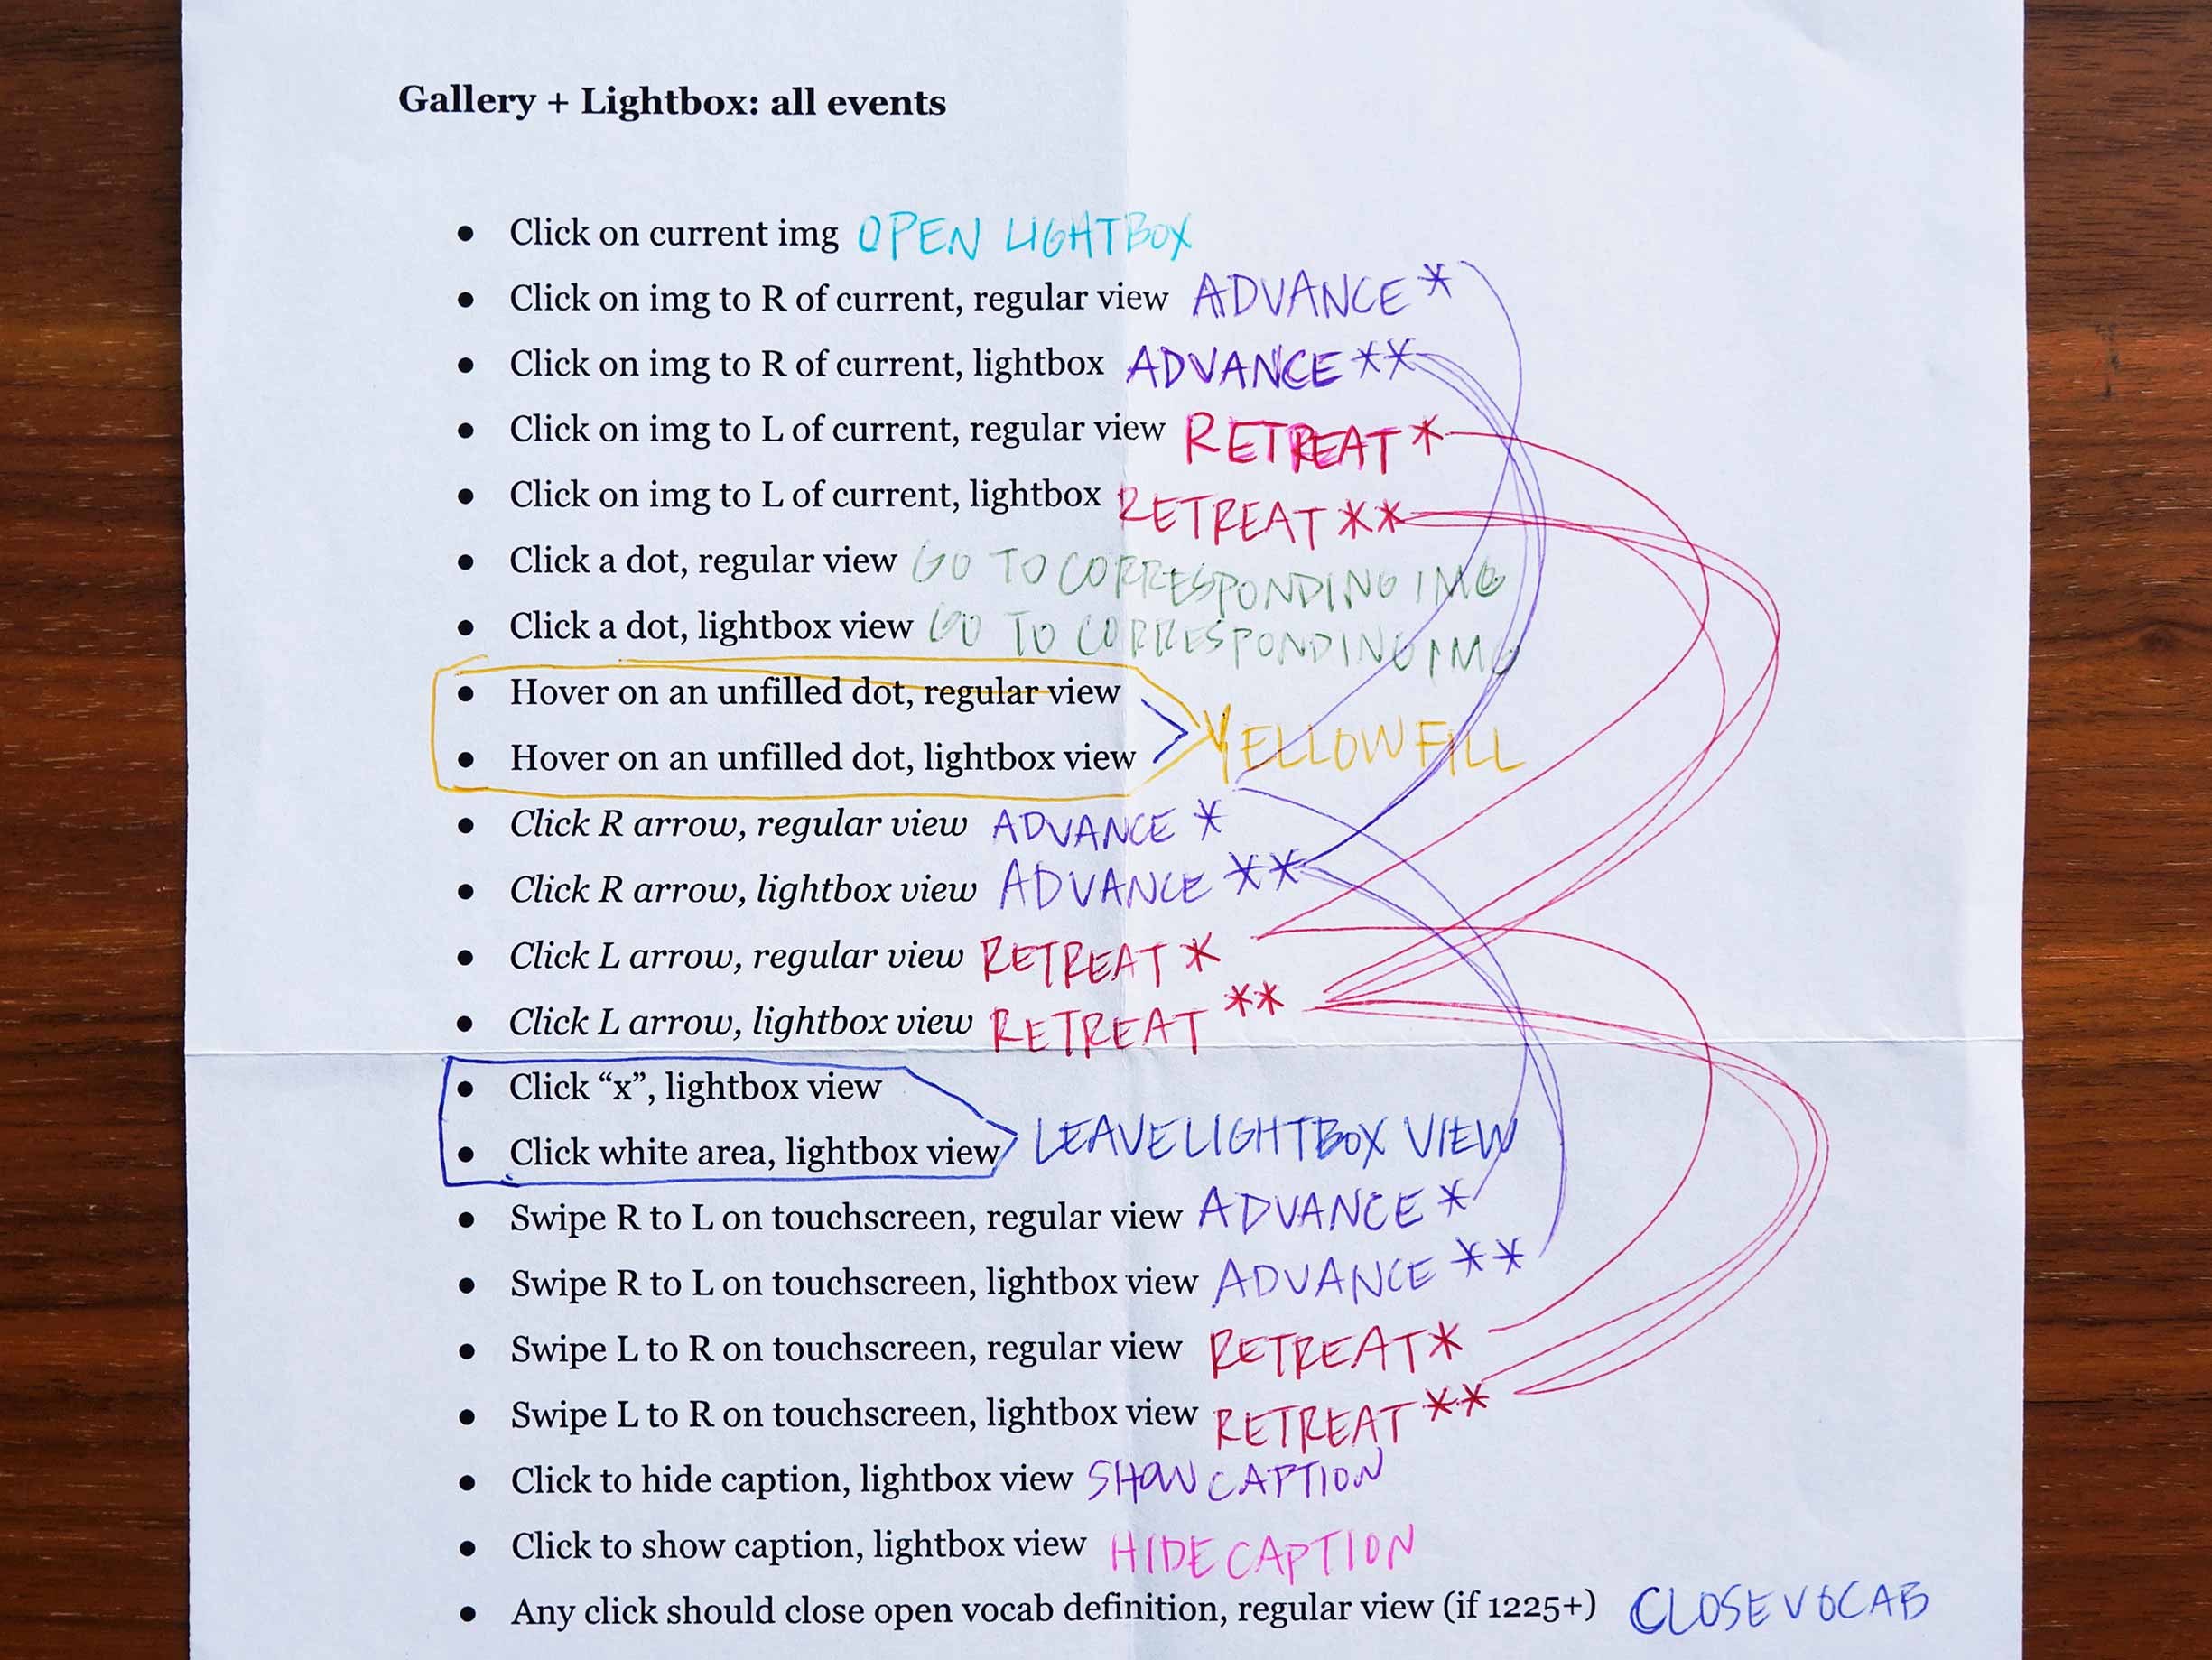 I printed a list of all interactions and subsequent behaviors my gallery and lightbox modules would need to accommodate. Then I took colored ballpoint pens and encoded those list items that accomplished the same effect, and could thereby use the same JavaScript function.